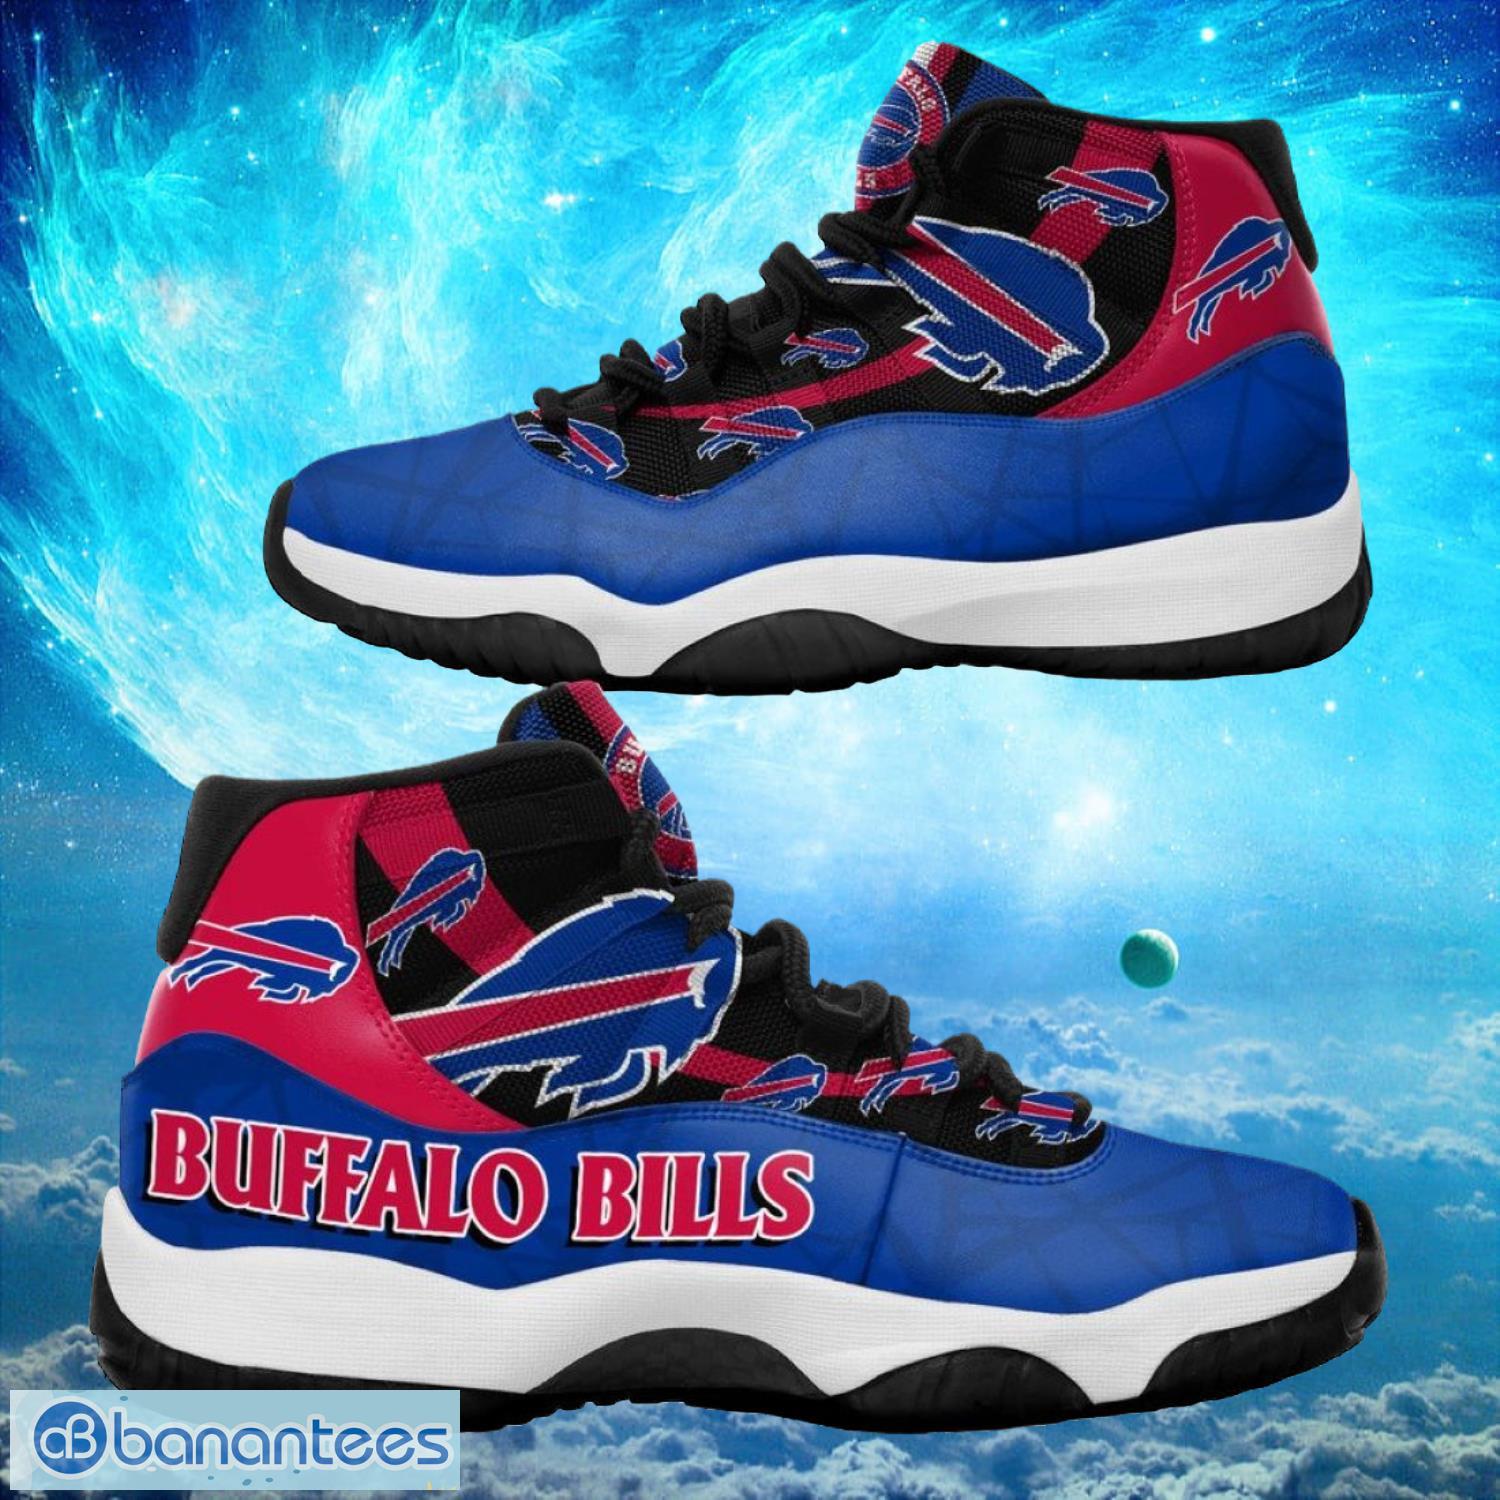 Buffalo Bills NFL Air Jordan 11 Sneakers Shoes Gift For Fans Product Photo 1